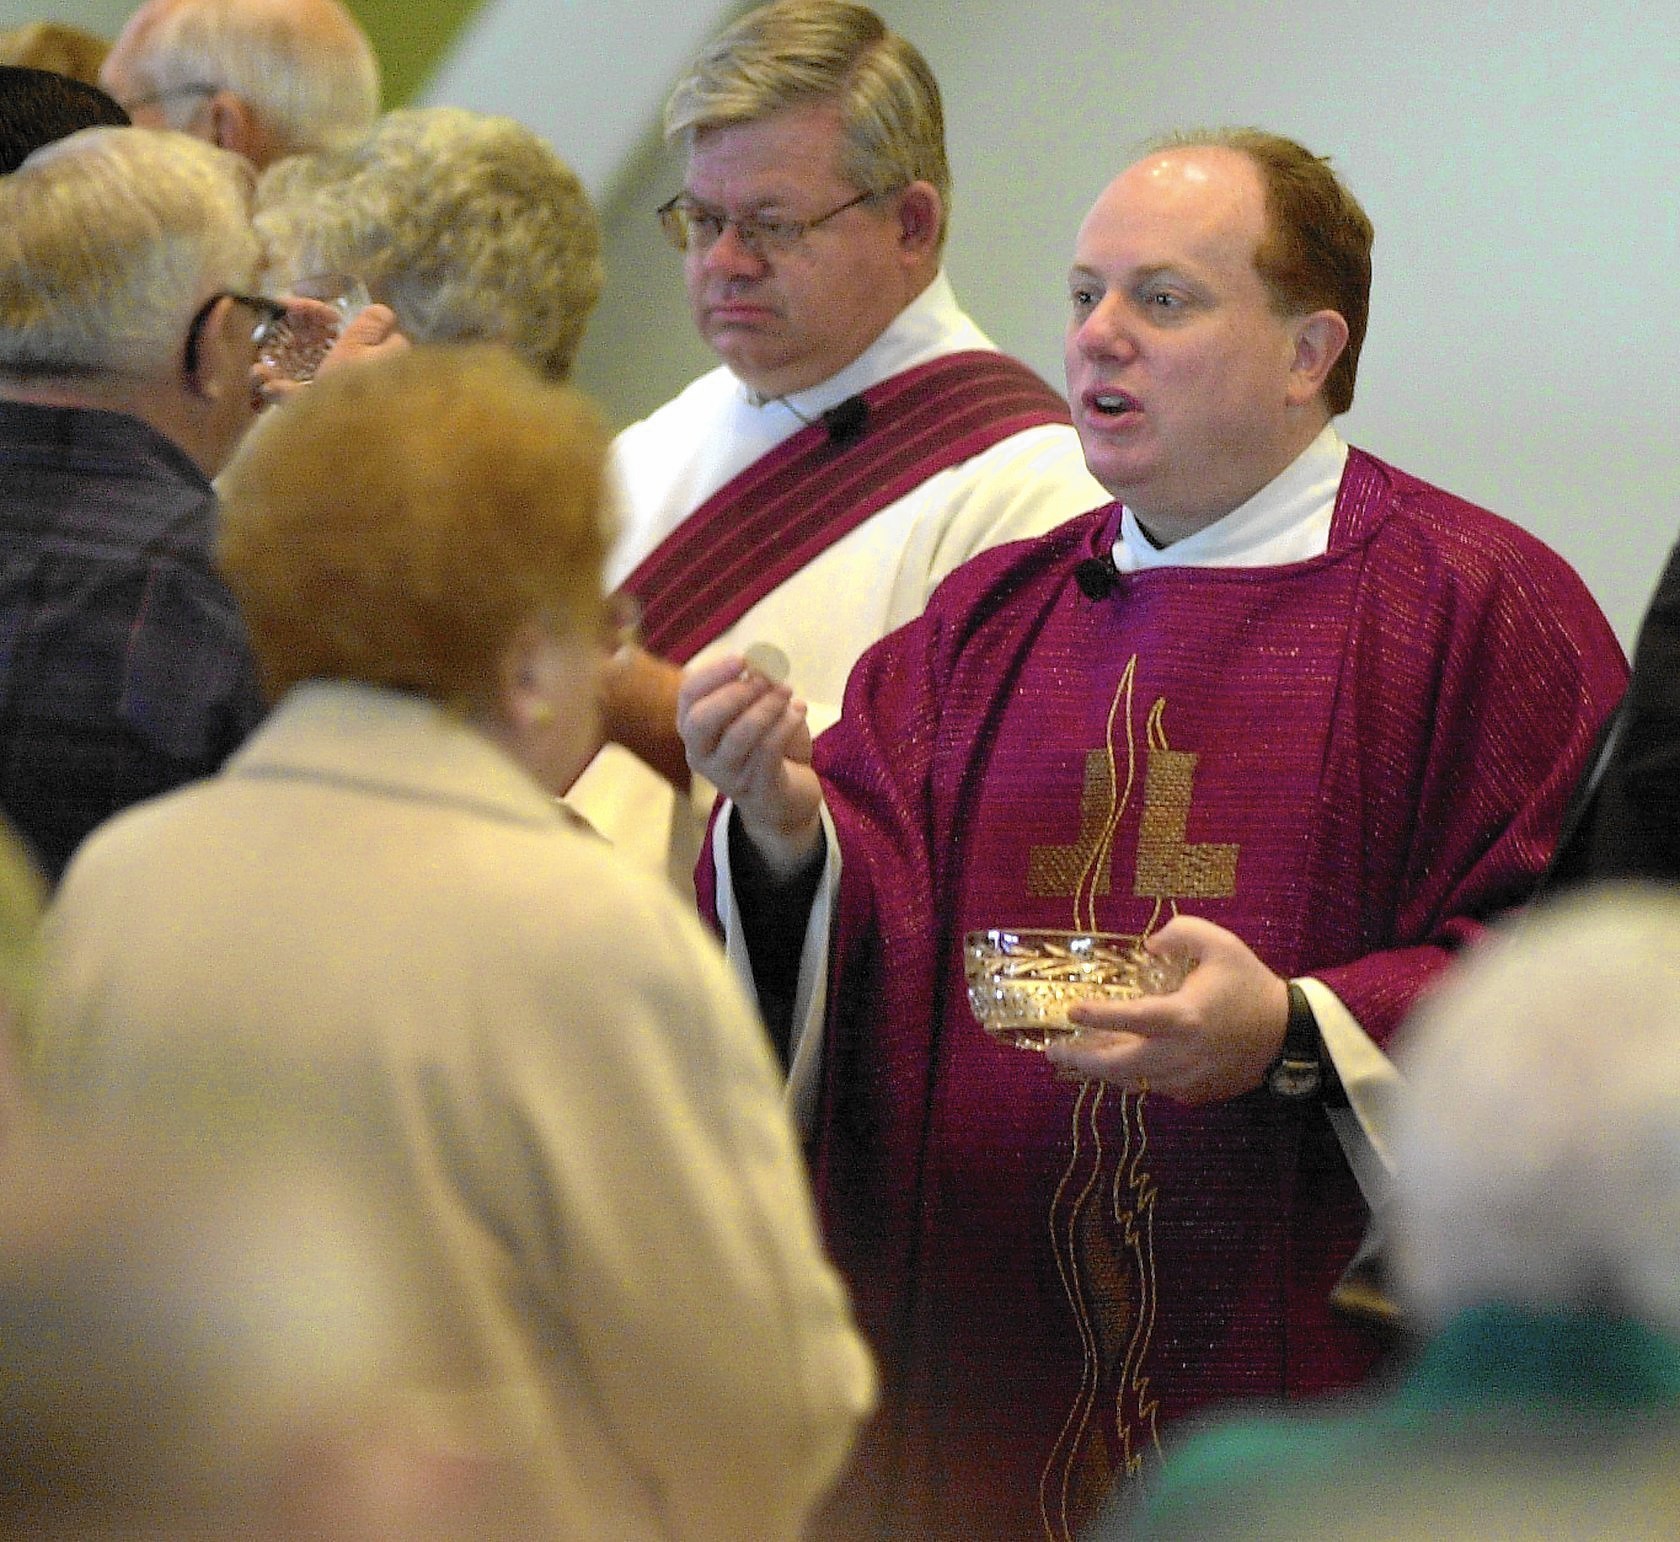 New priest coming to Clarendon Hills' Notre Dame parish with wife and ...